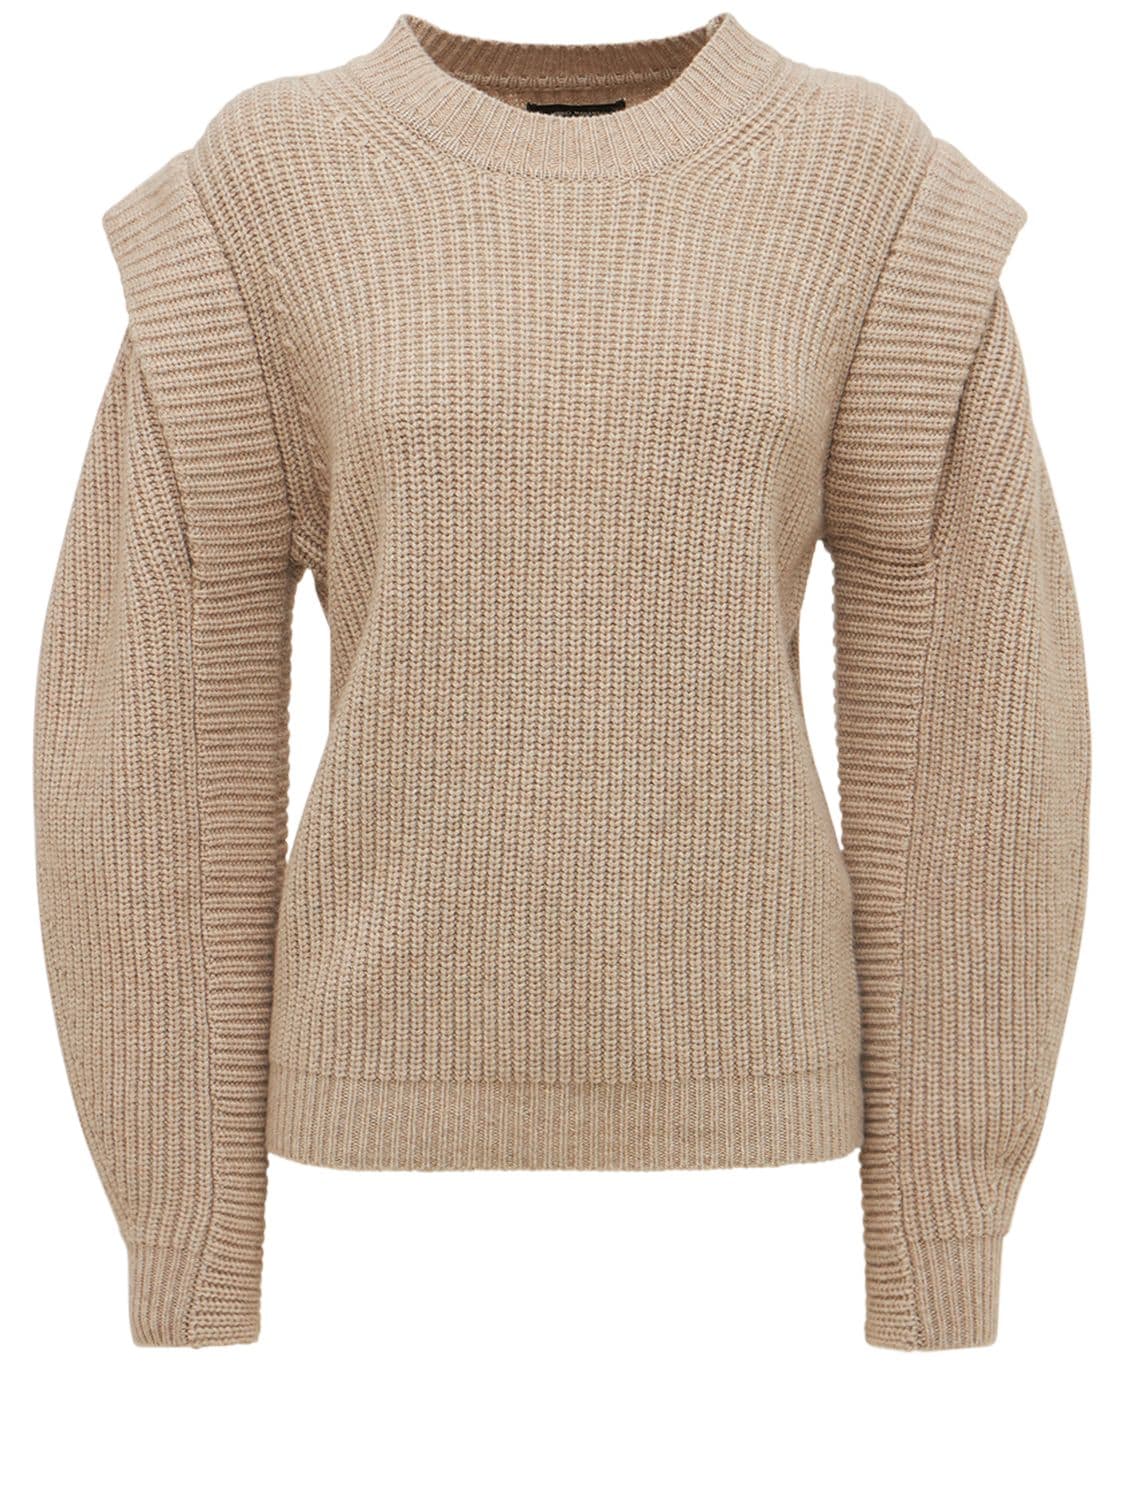 ISABEL MARANT Bolton Wool & Cashmere Knit Sweater